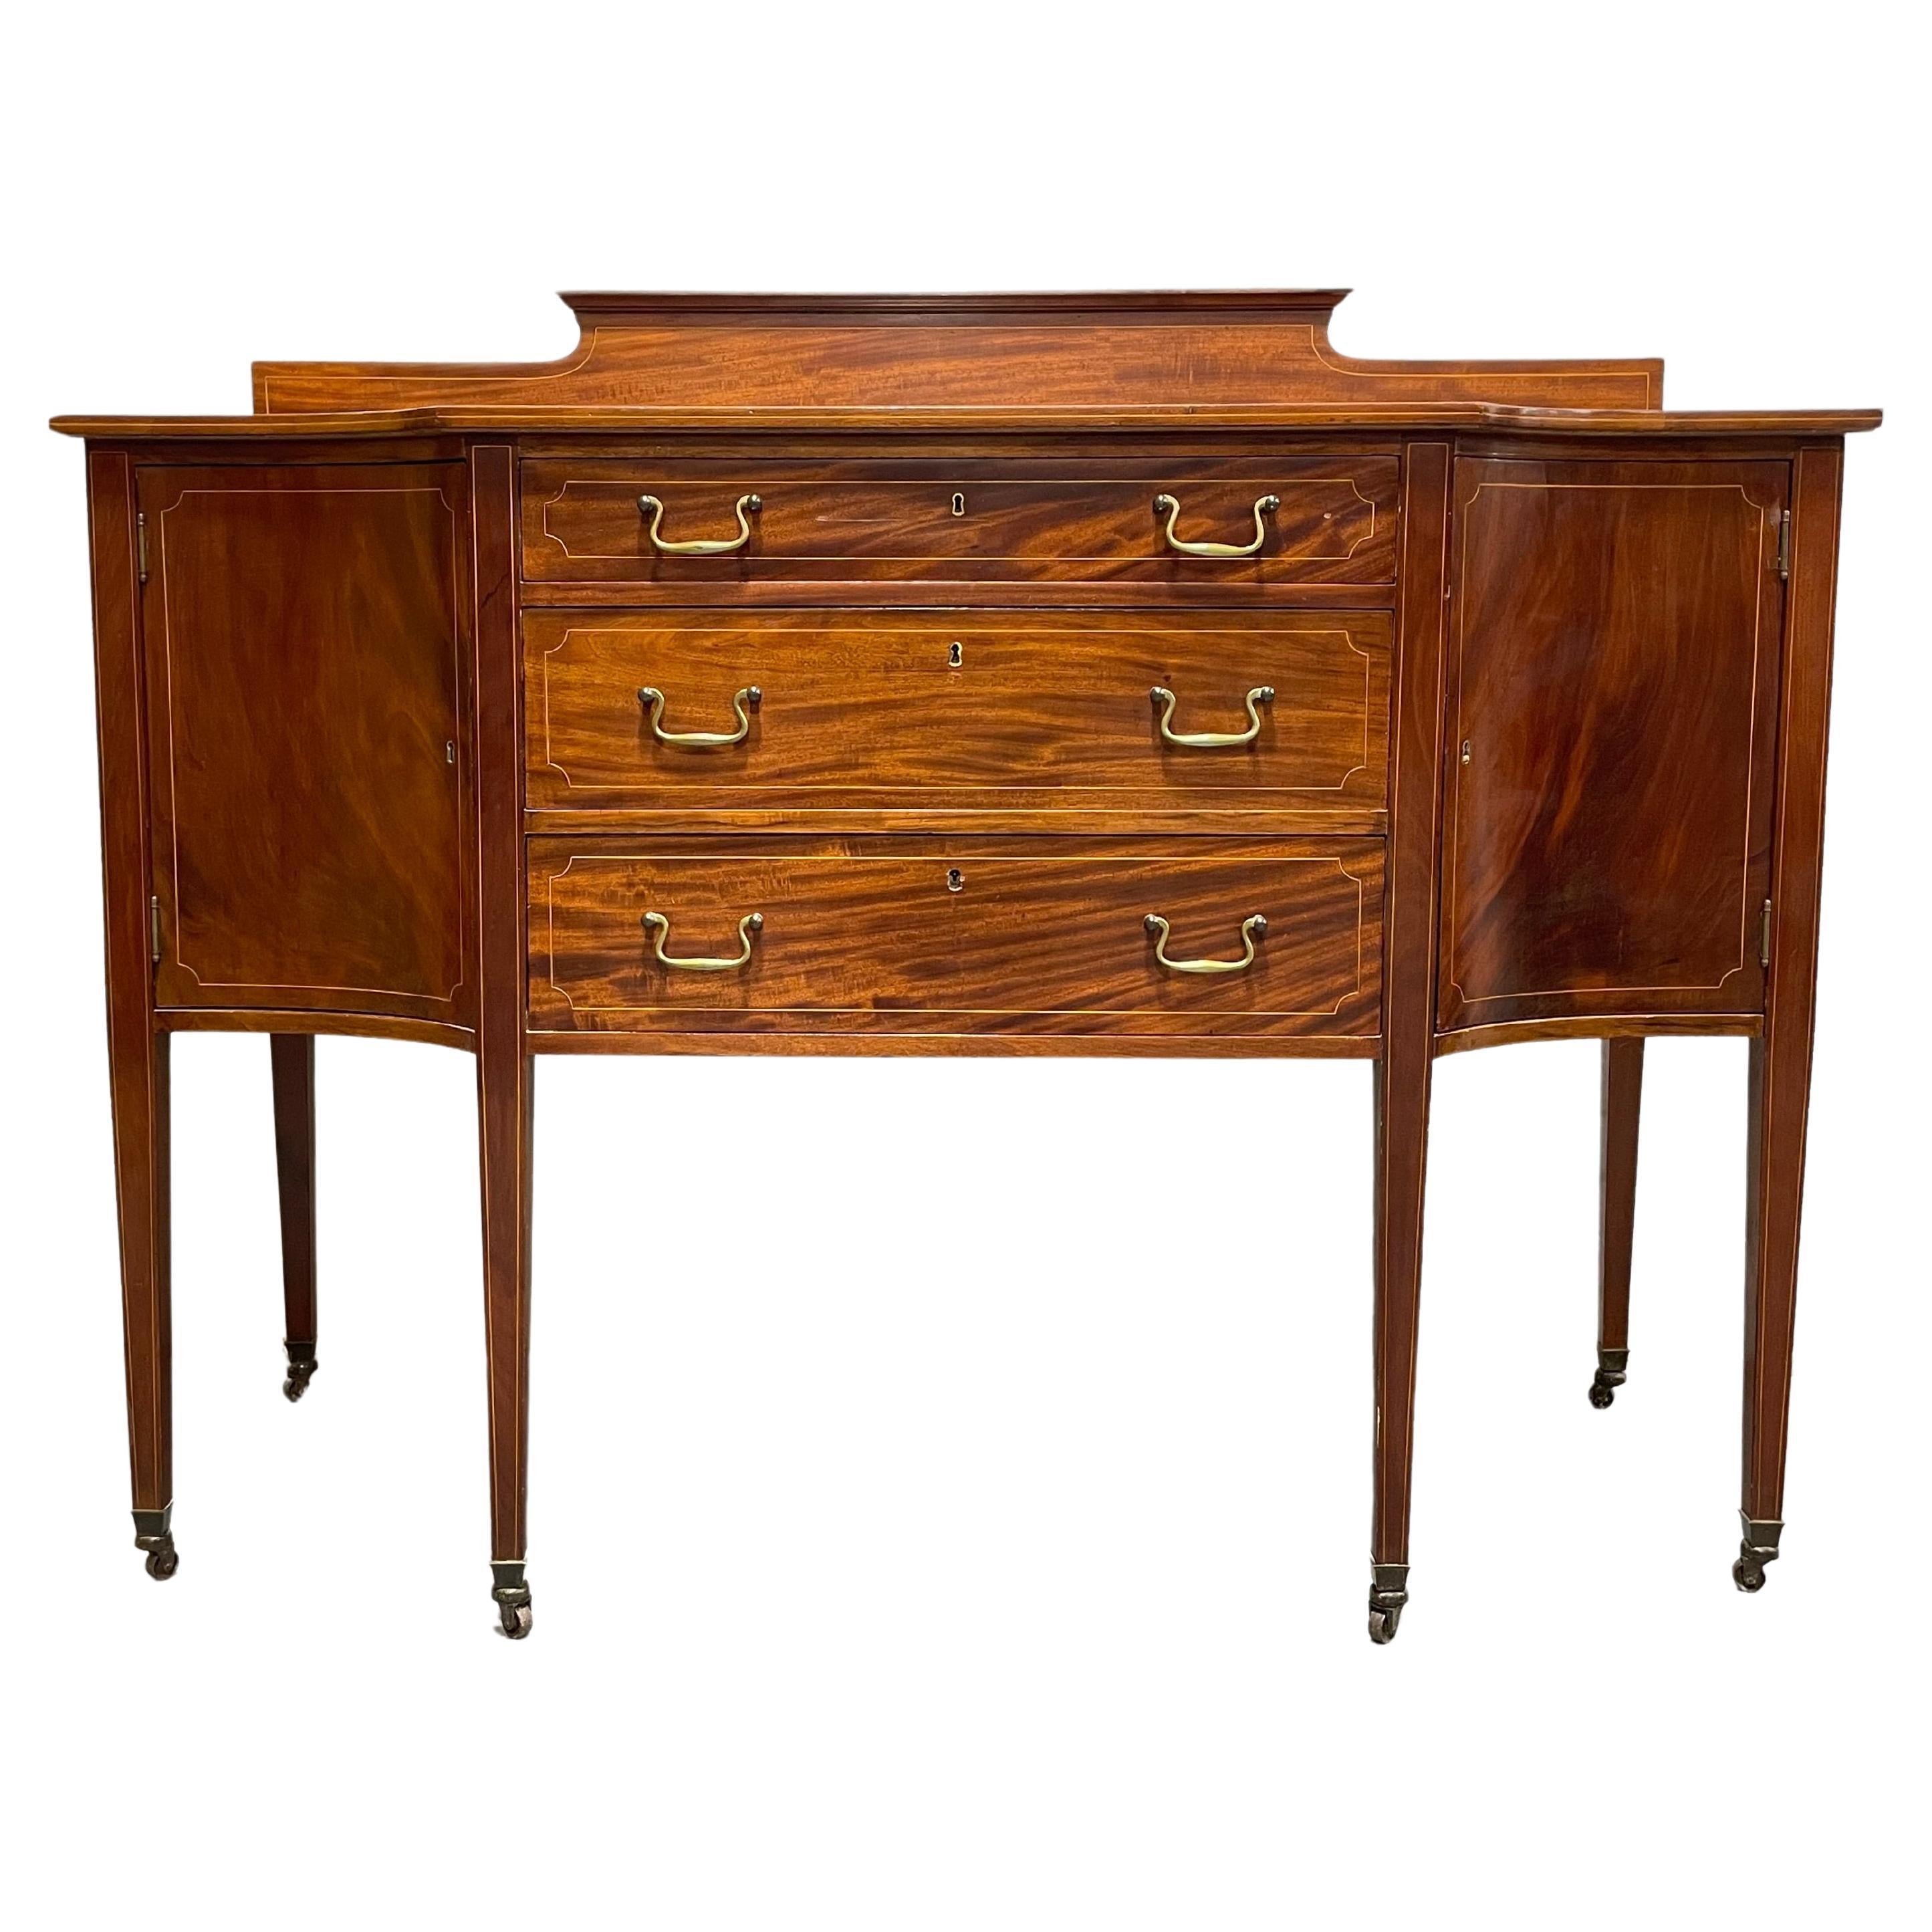 Antique SHERATON styled Mahogany SIDEBOARD / Server, c. 1910’s For Sale